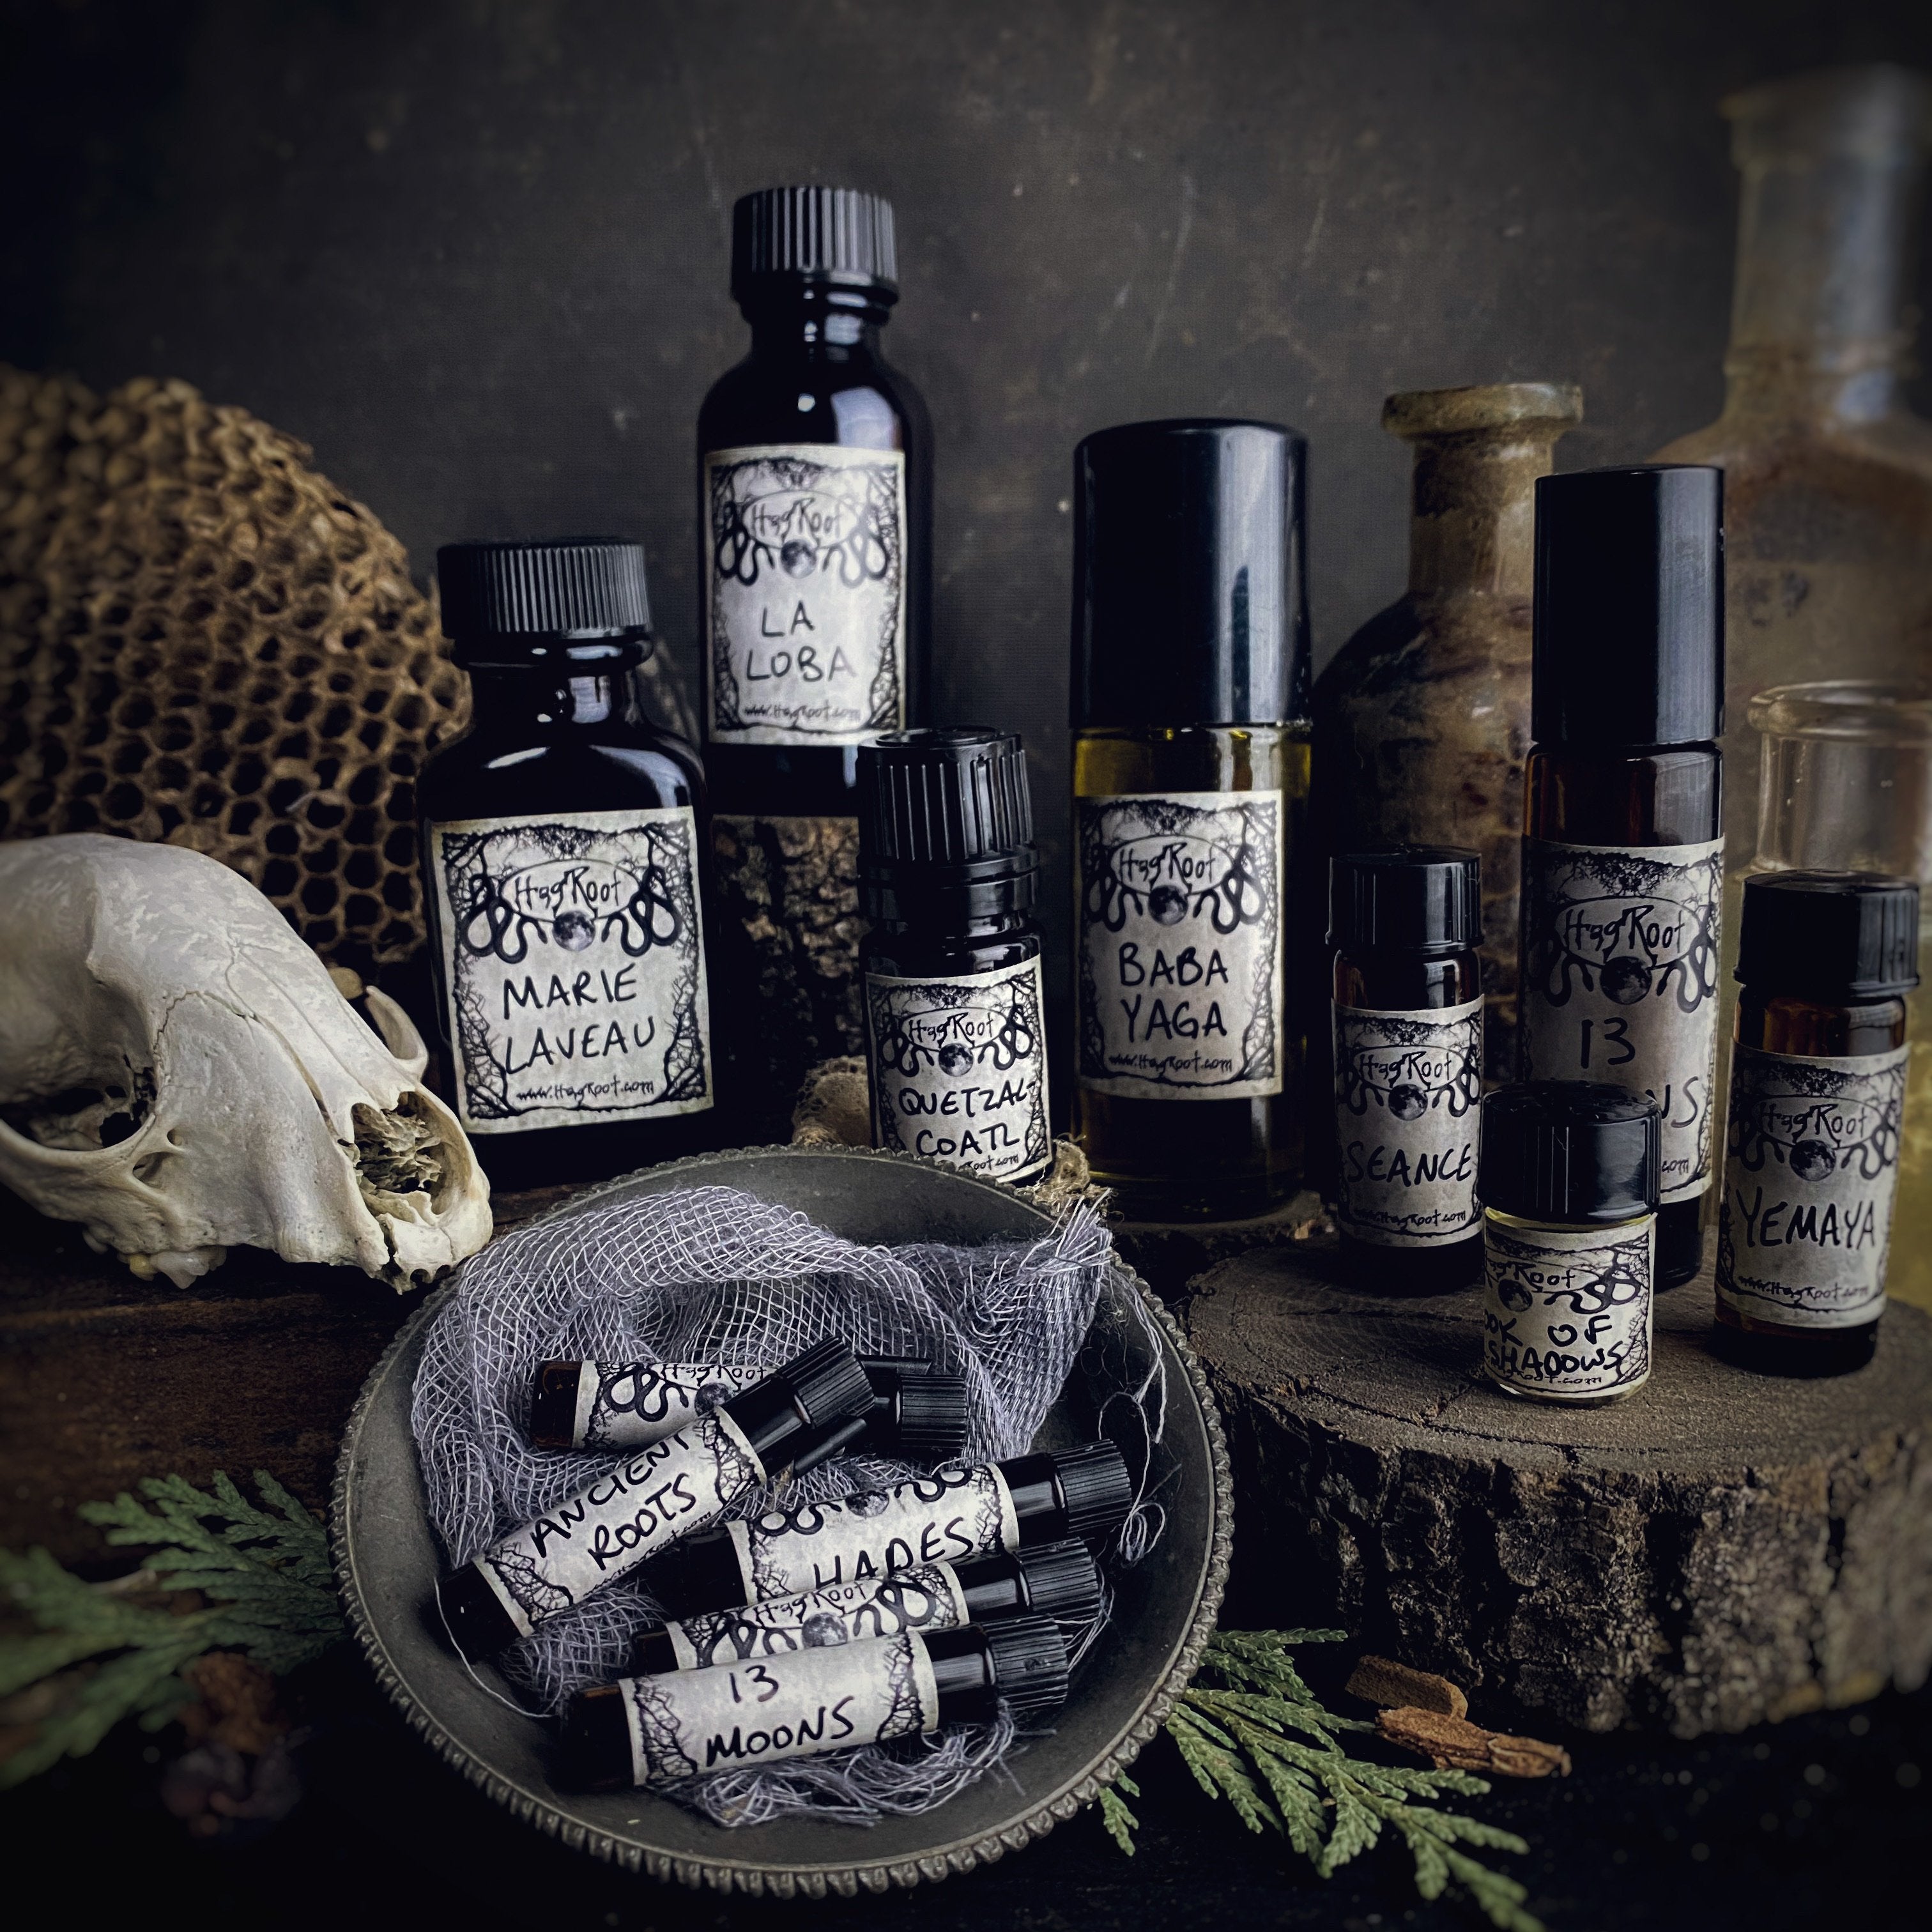 HEKATE-(Rose, Vanilla, Amber, Cinnamon, Frankincense)-2021 Edition-Perfume, Cologne, Anointing, Ritual Oil